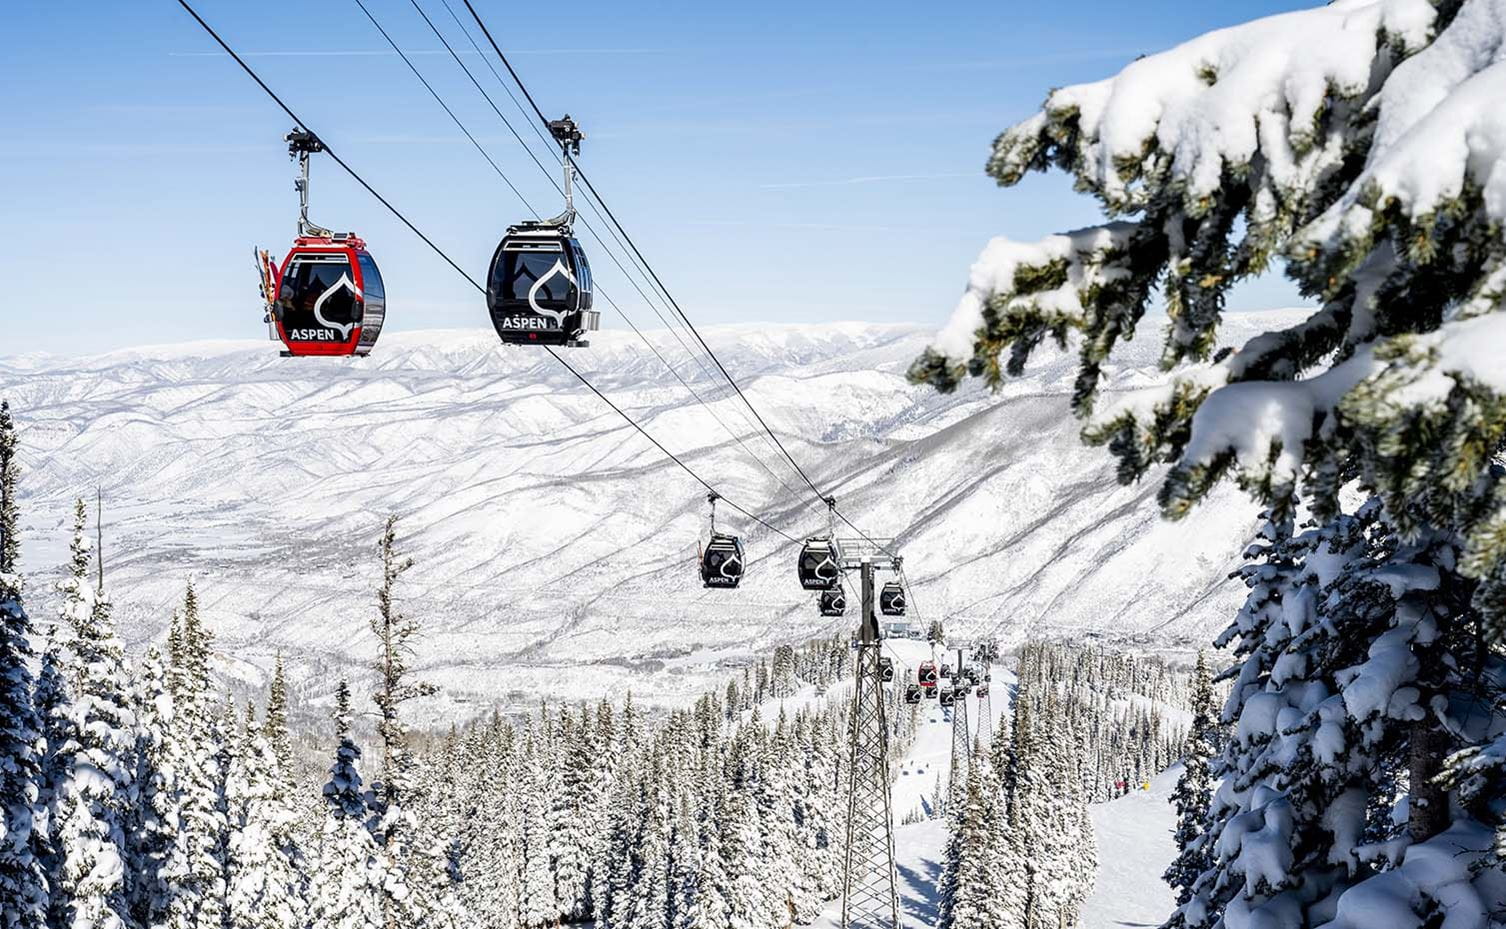 Aspen Snowmass is opening early